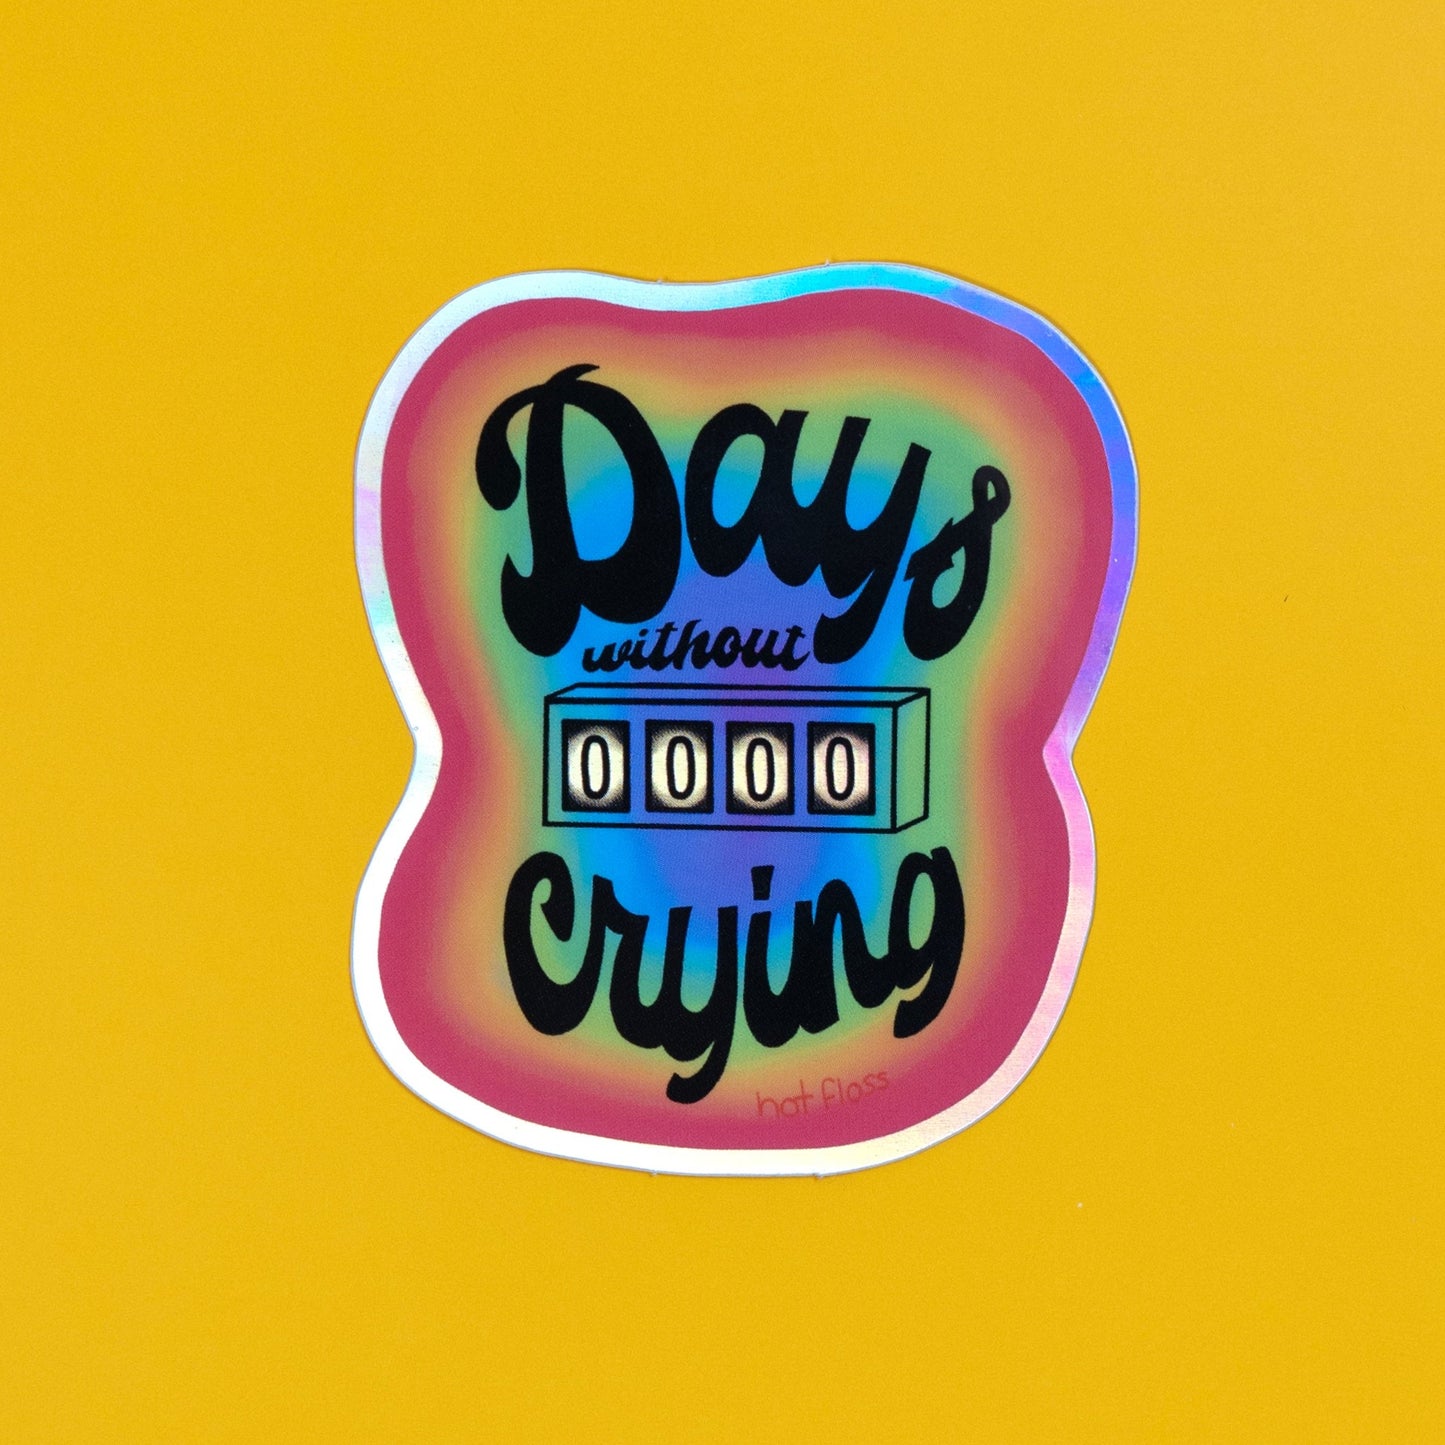 0 Days Without Crying Holo Sticker